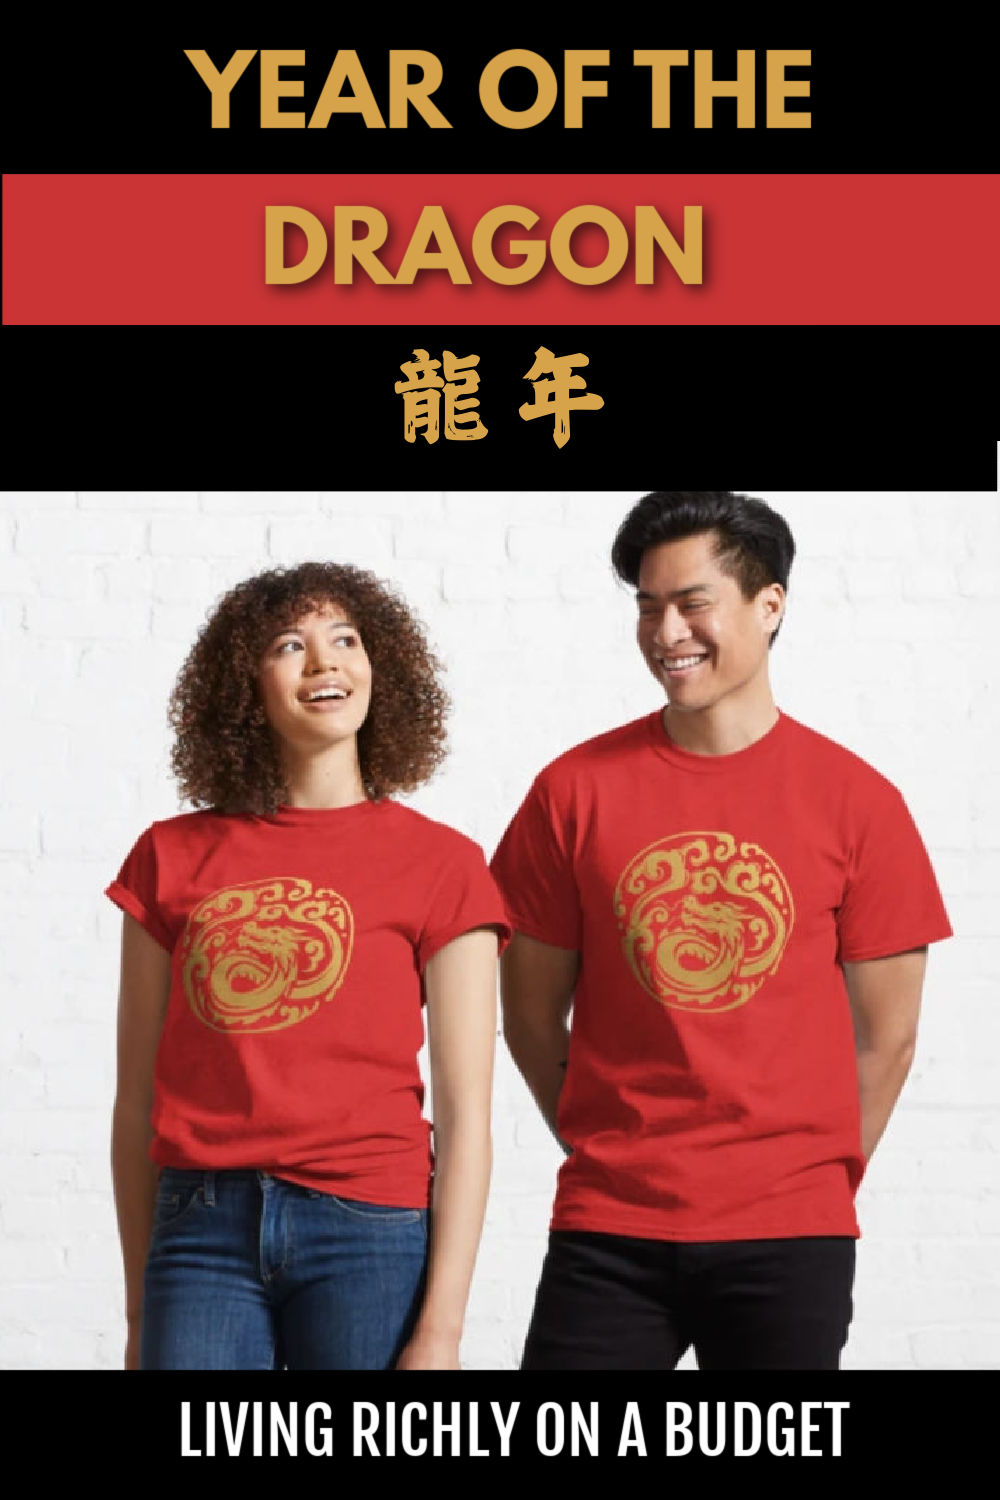 year-of-the-dragon-t-shirt | Living Richly on a Budget